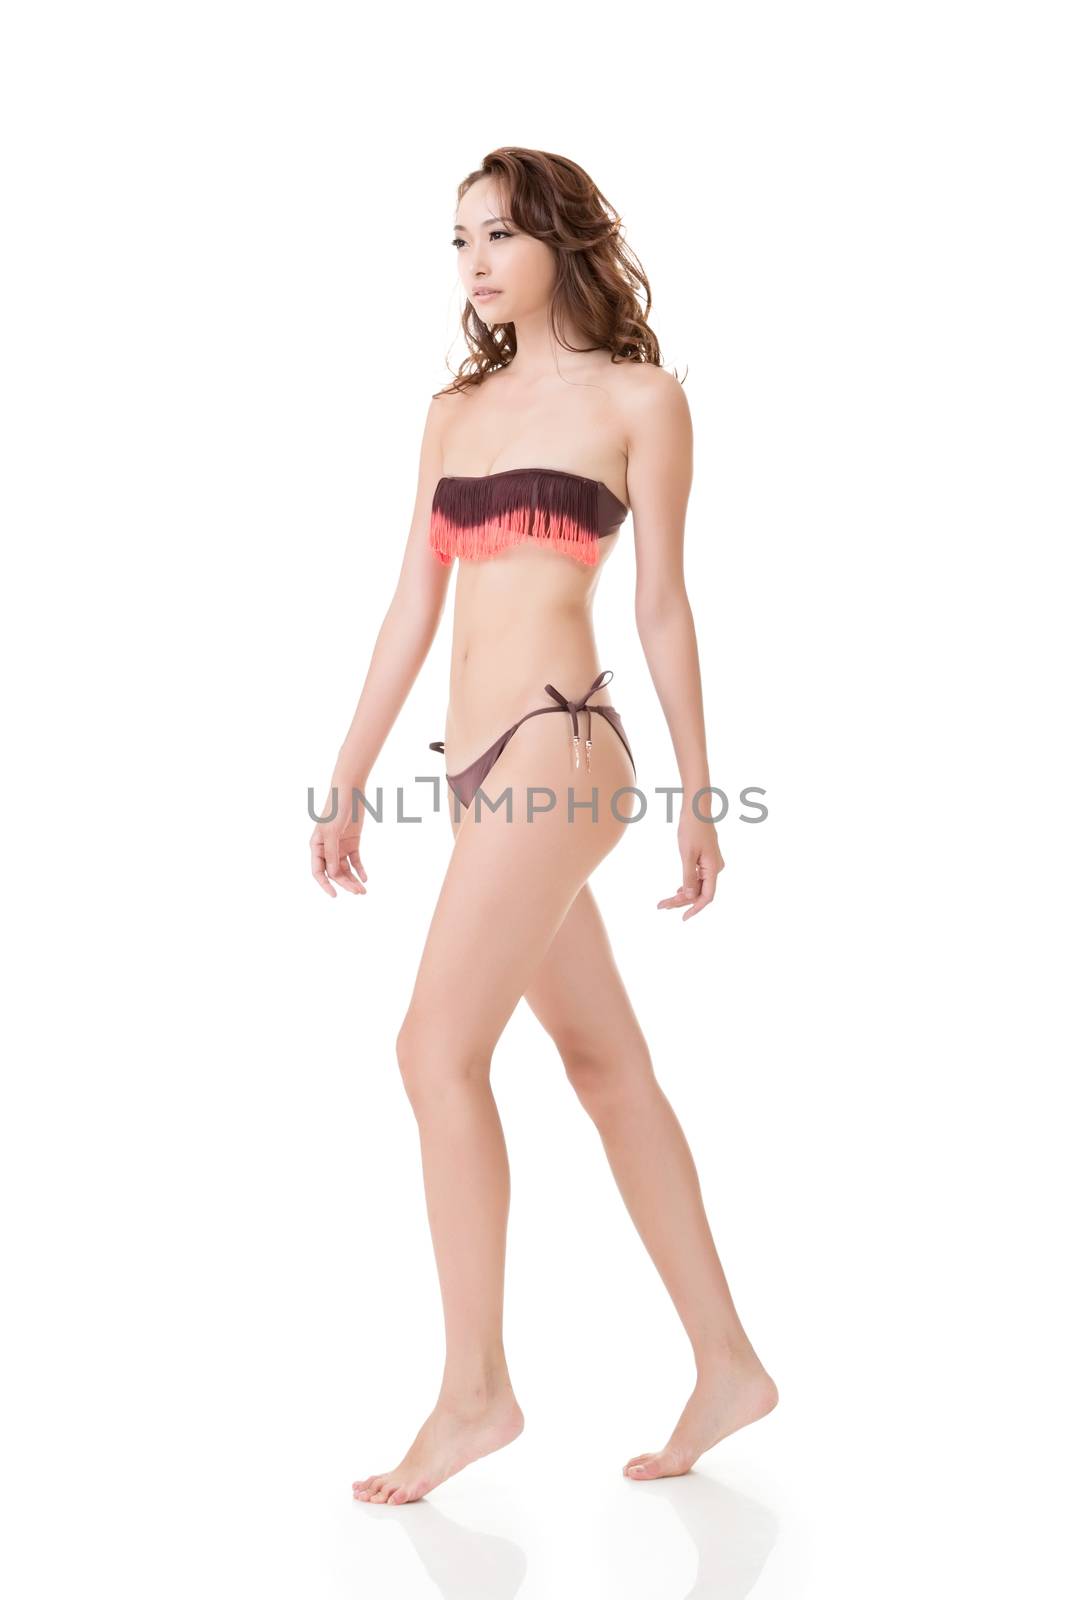 Summer bikini sexy asian young woman walking attractively. Full length portrait. Isolated on the white background.